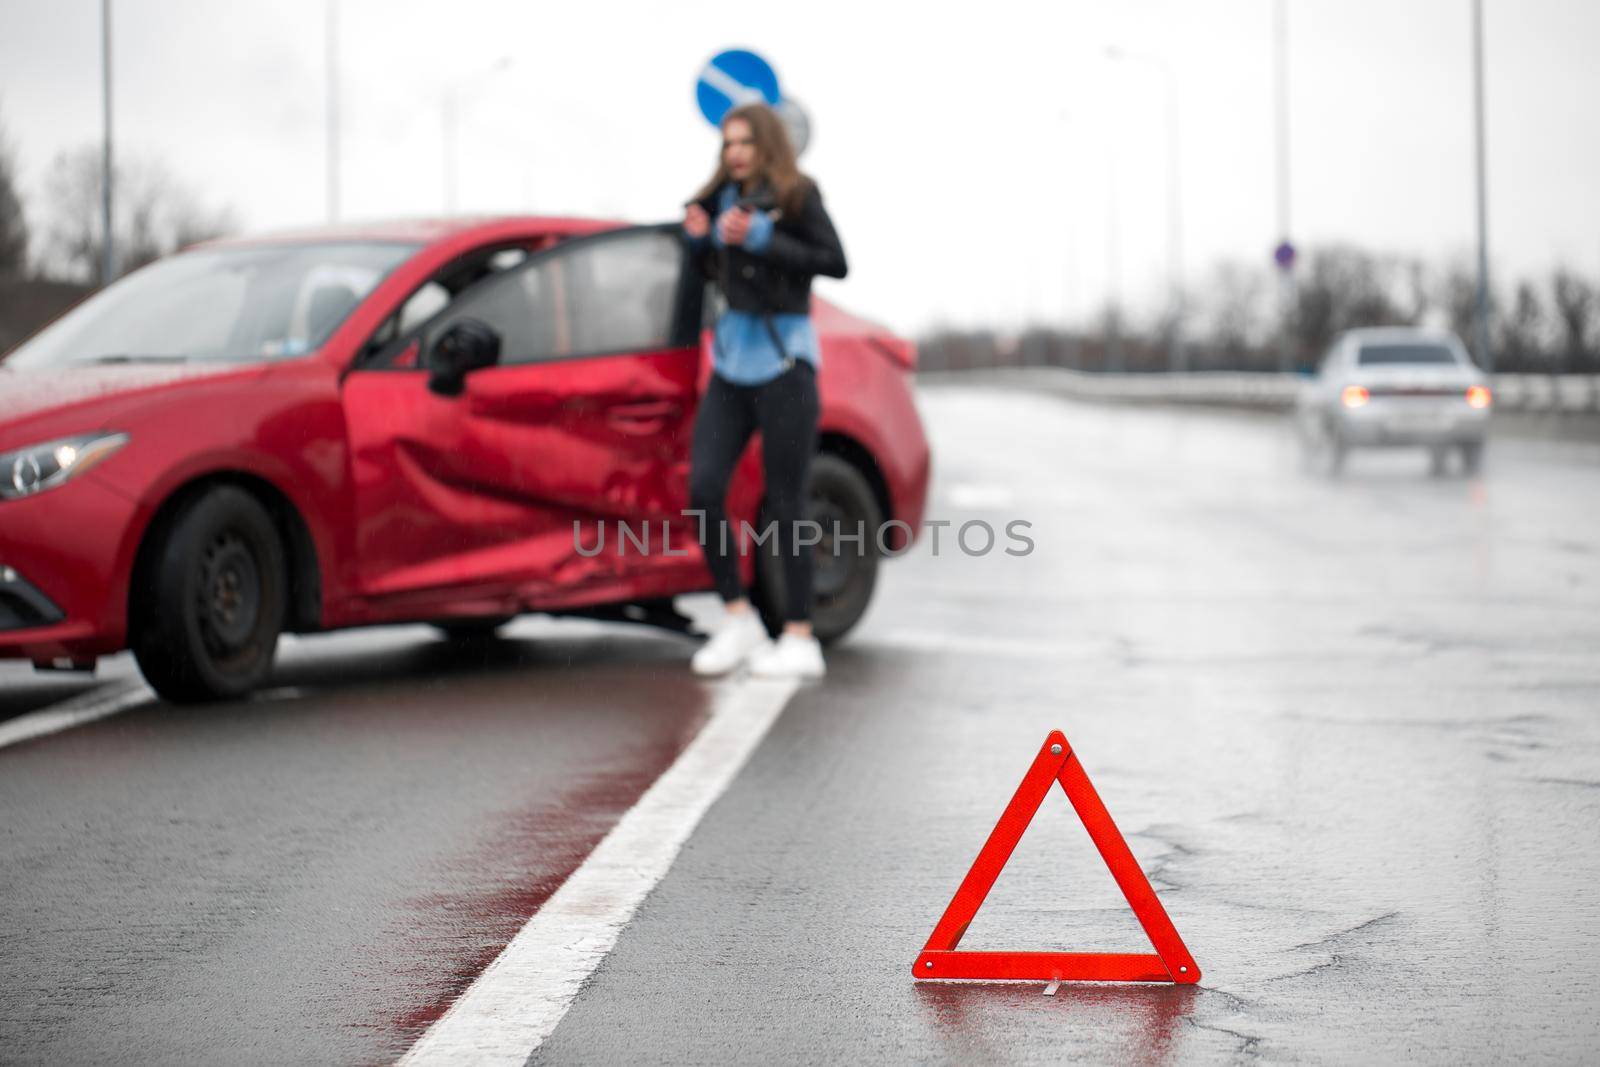 Driver sitting at roadside after traffic accident. Focus is on the red triangle sign